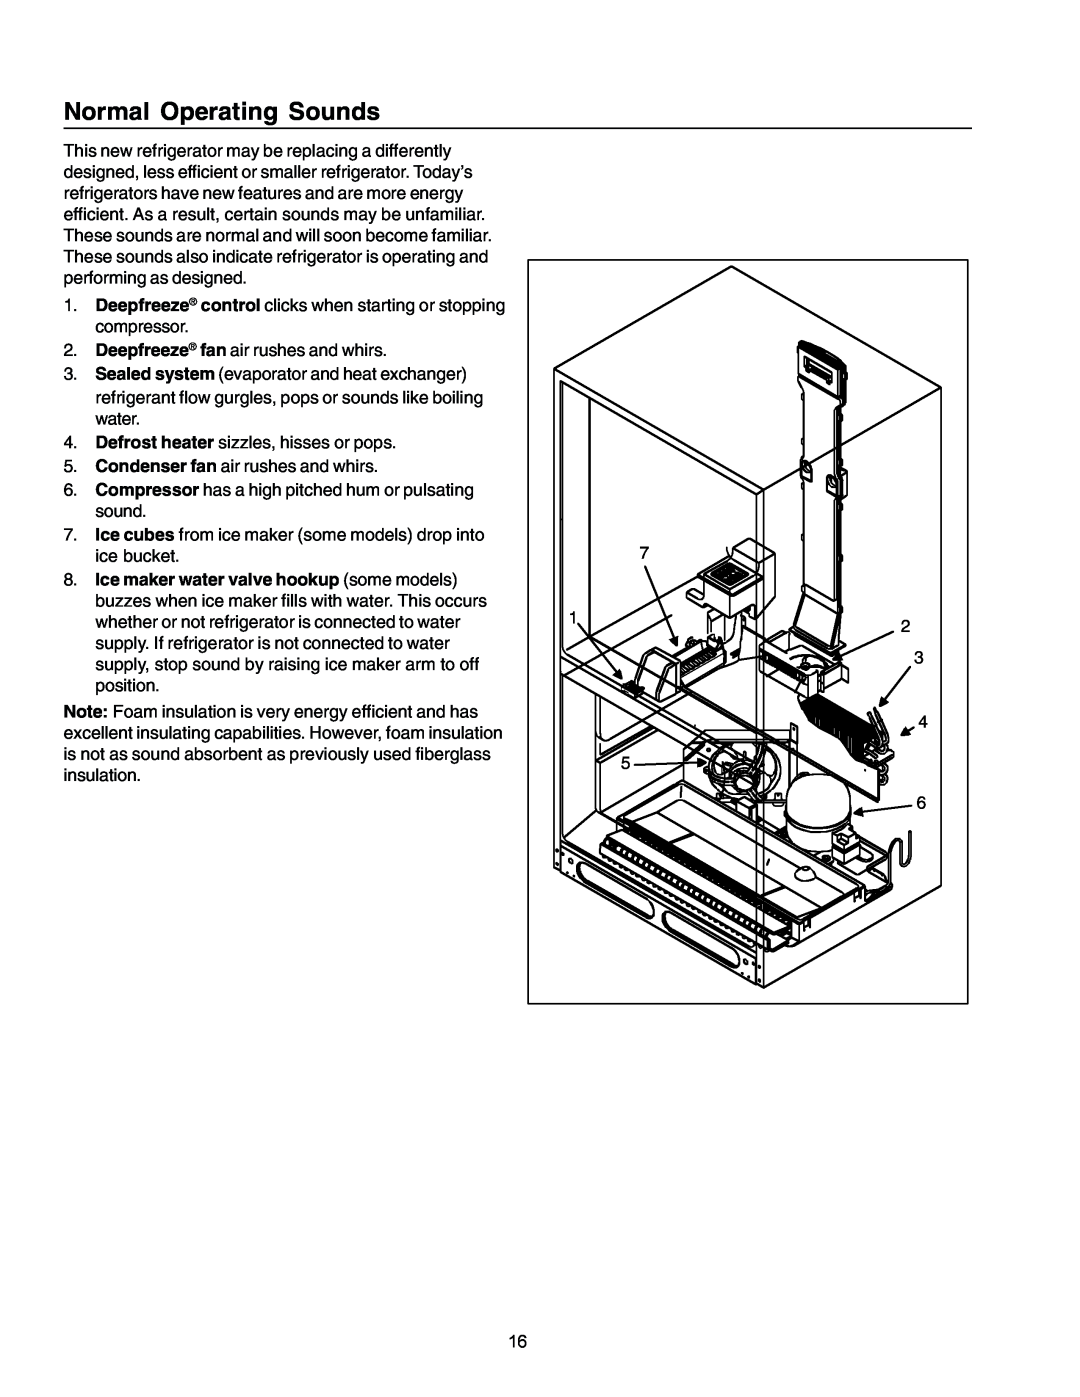 Amana IA 52204-0001 owner manual Normal Operating Sounds, Ice maker water valve hookup some models 